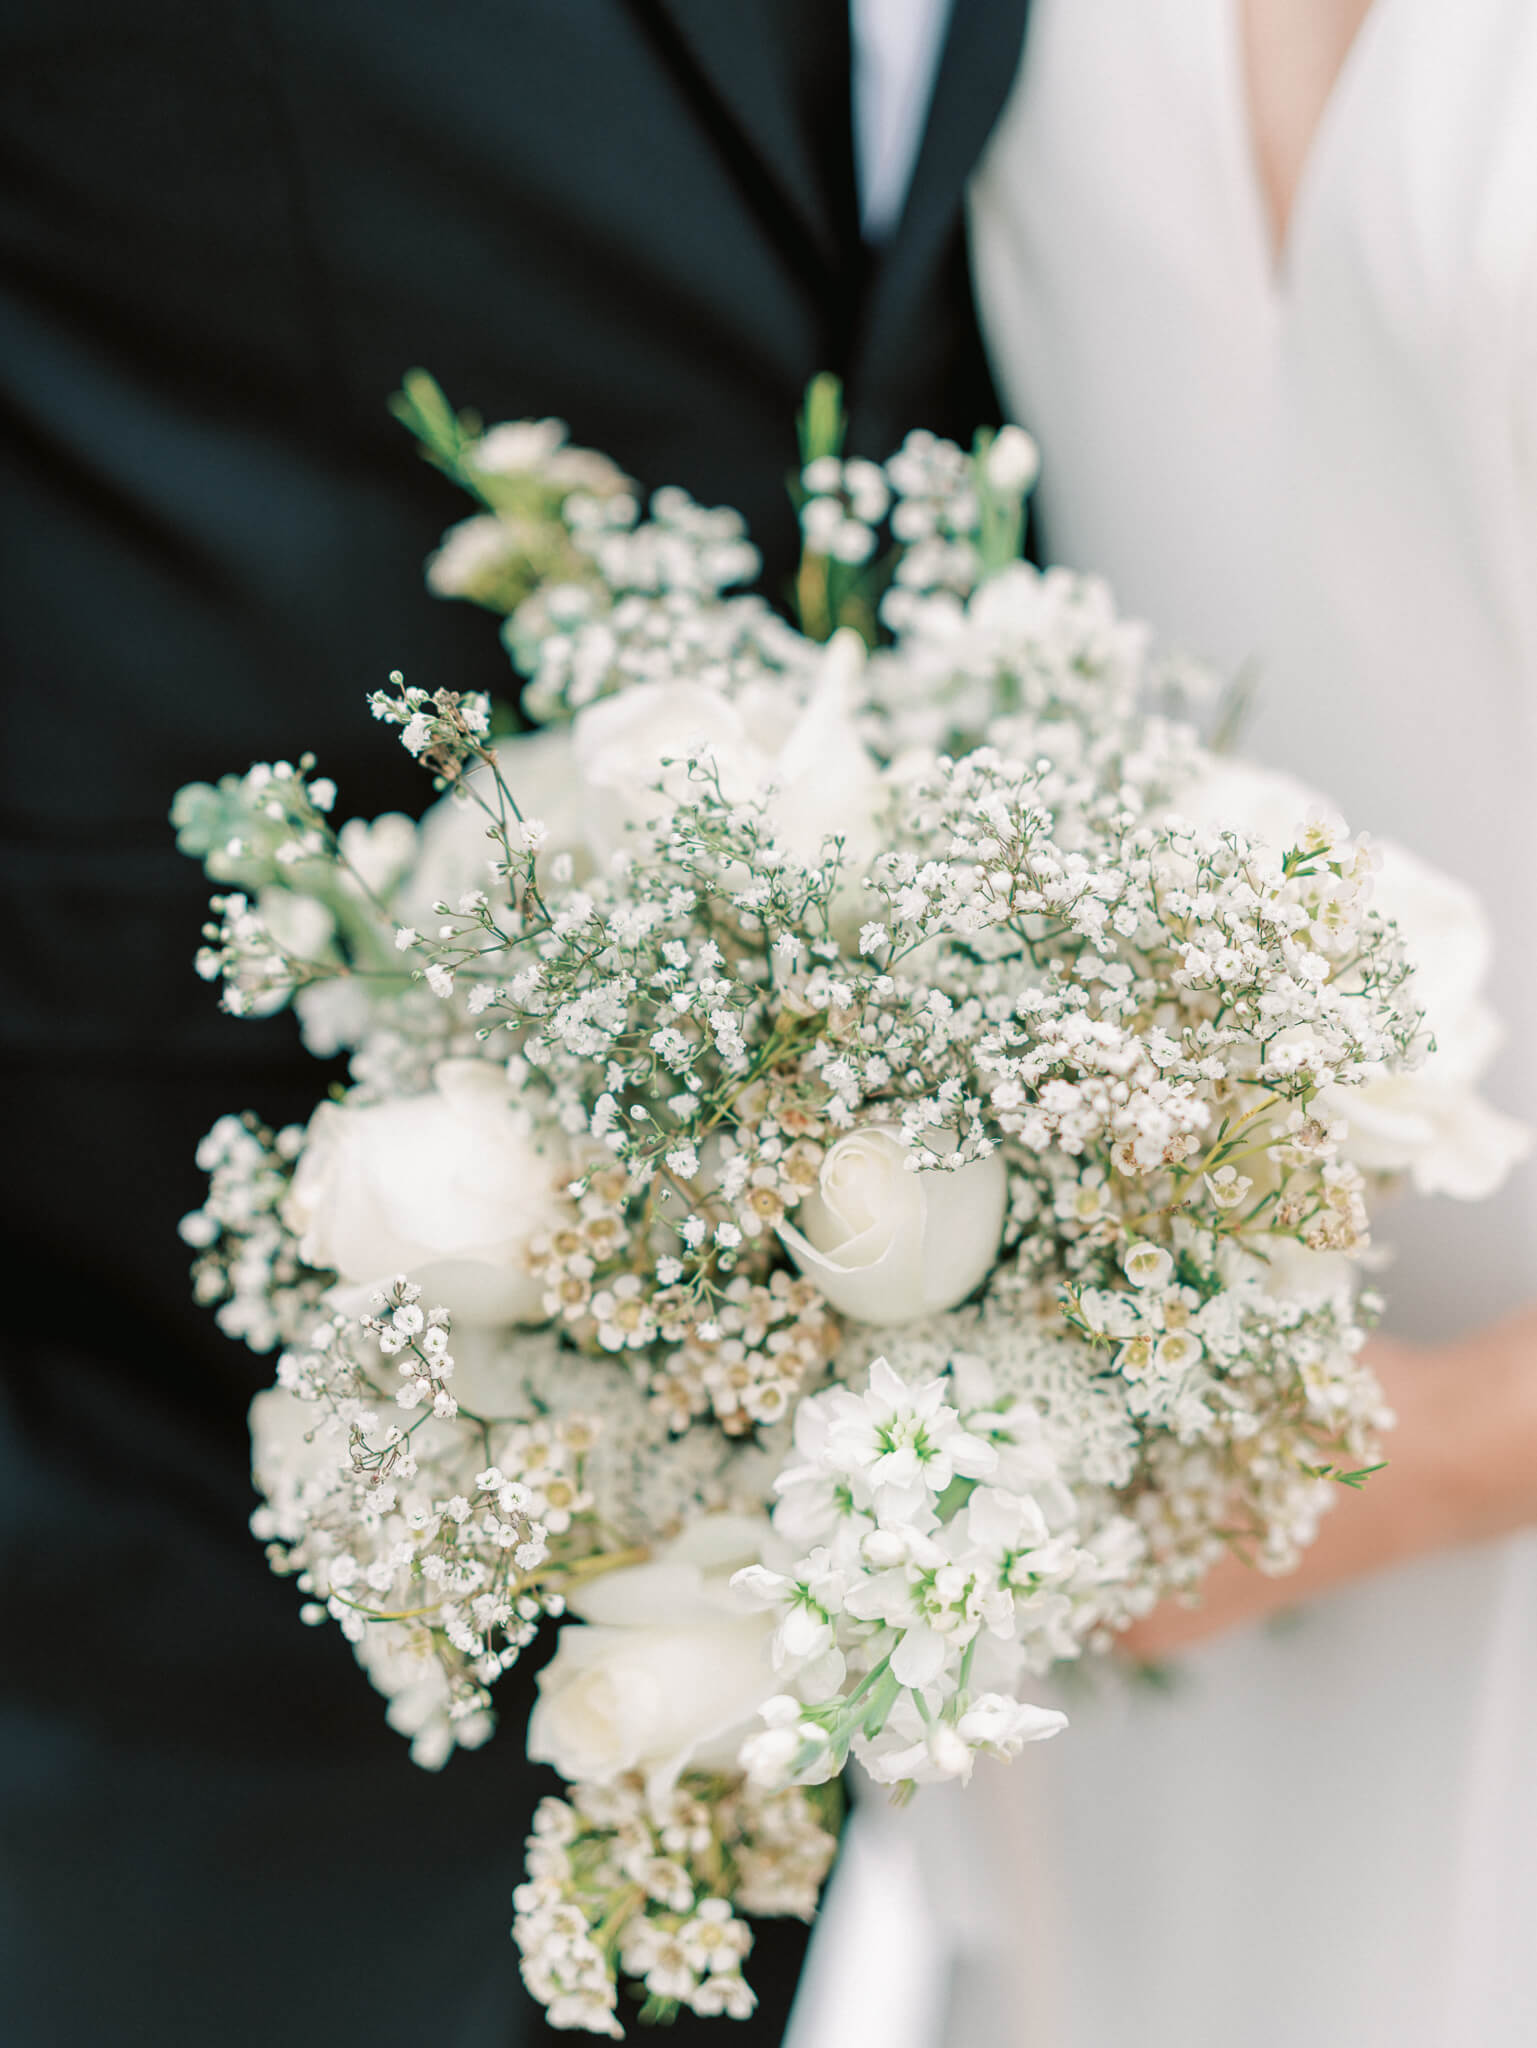 Close-up of a bridal bouquet made of roses and baby's breath.